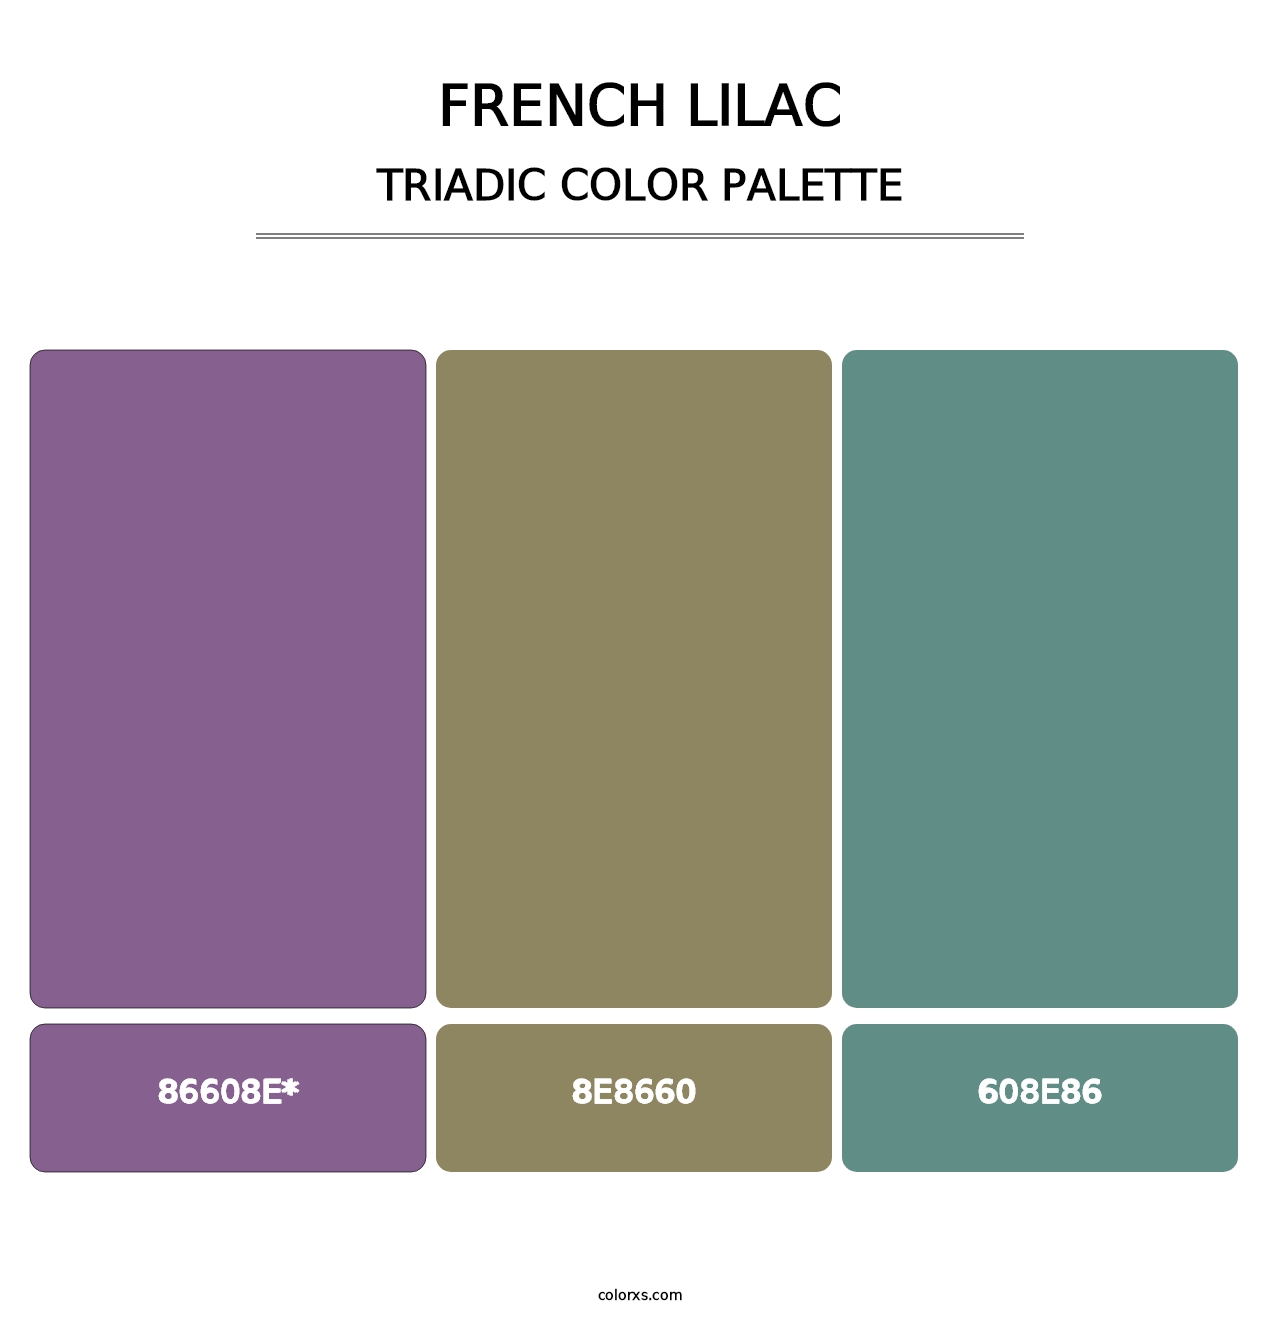 French Lilac - Triadic Color Palette